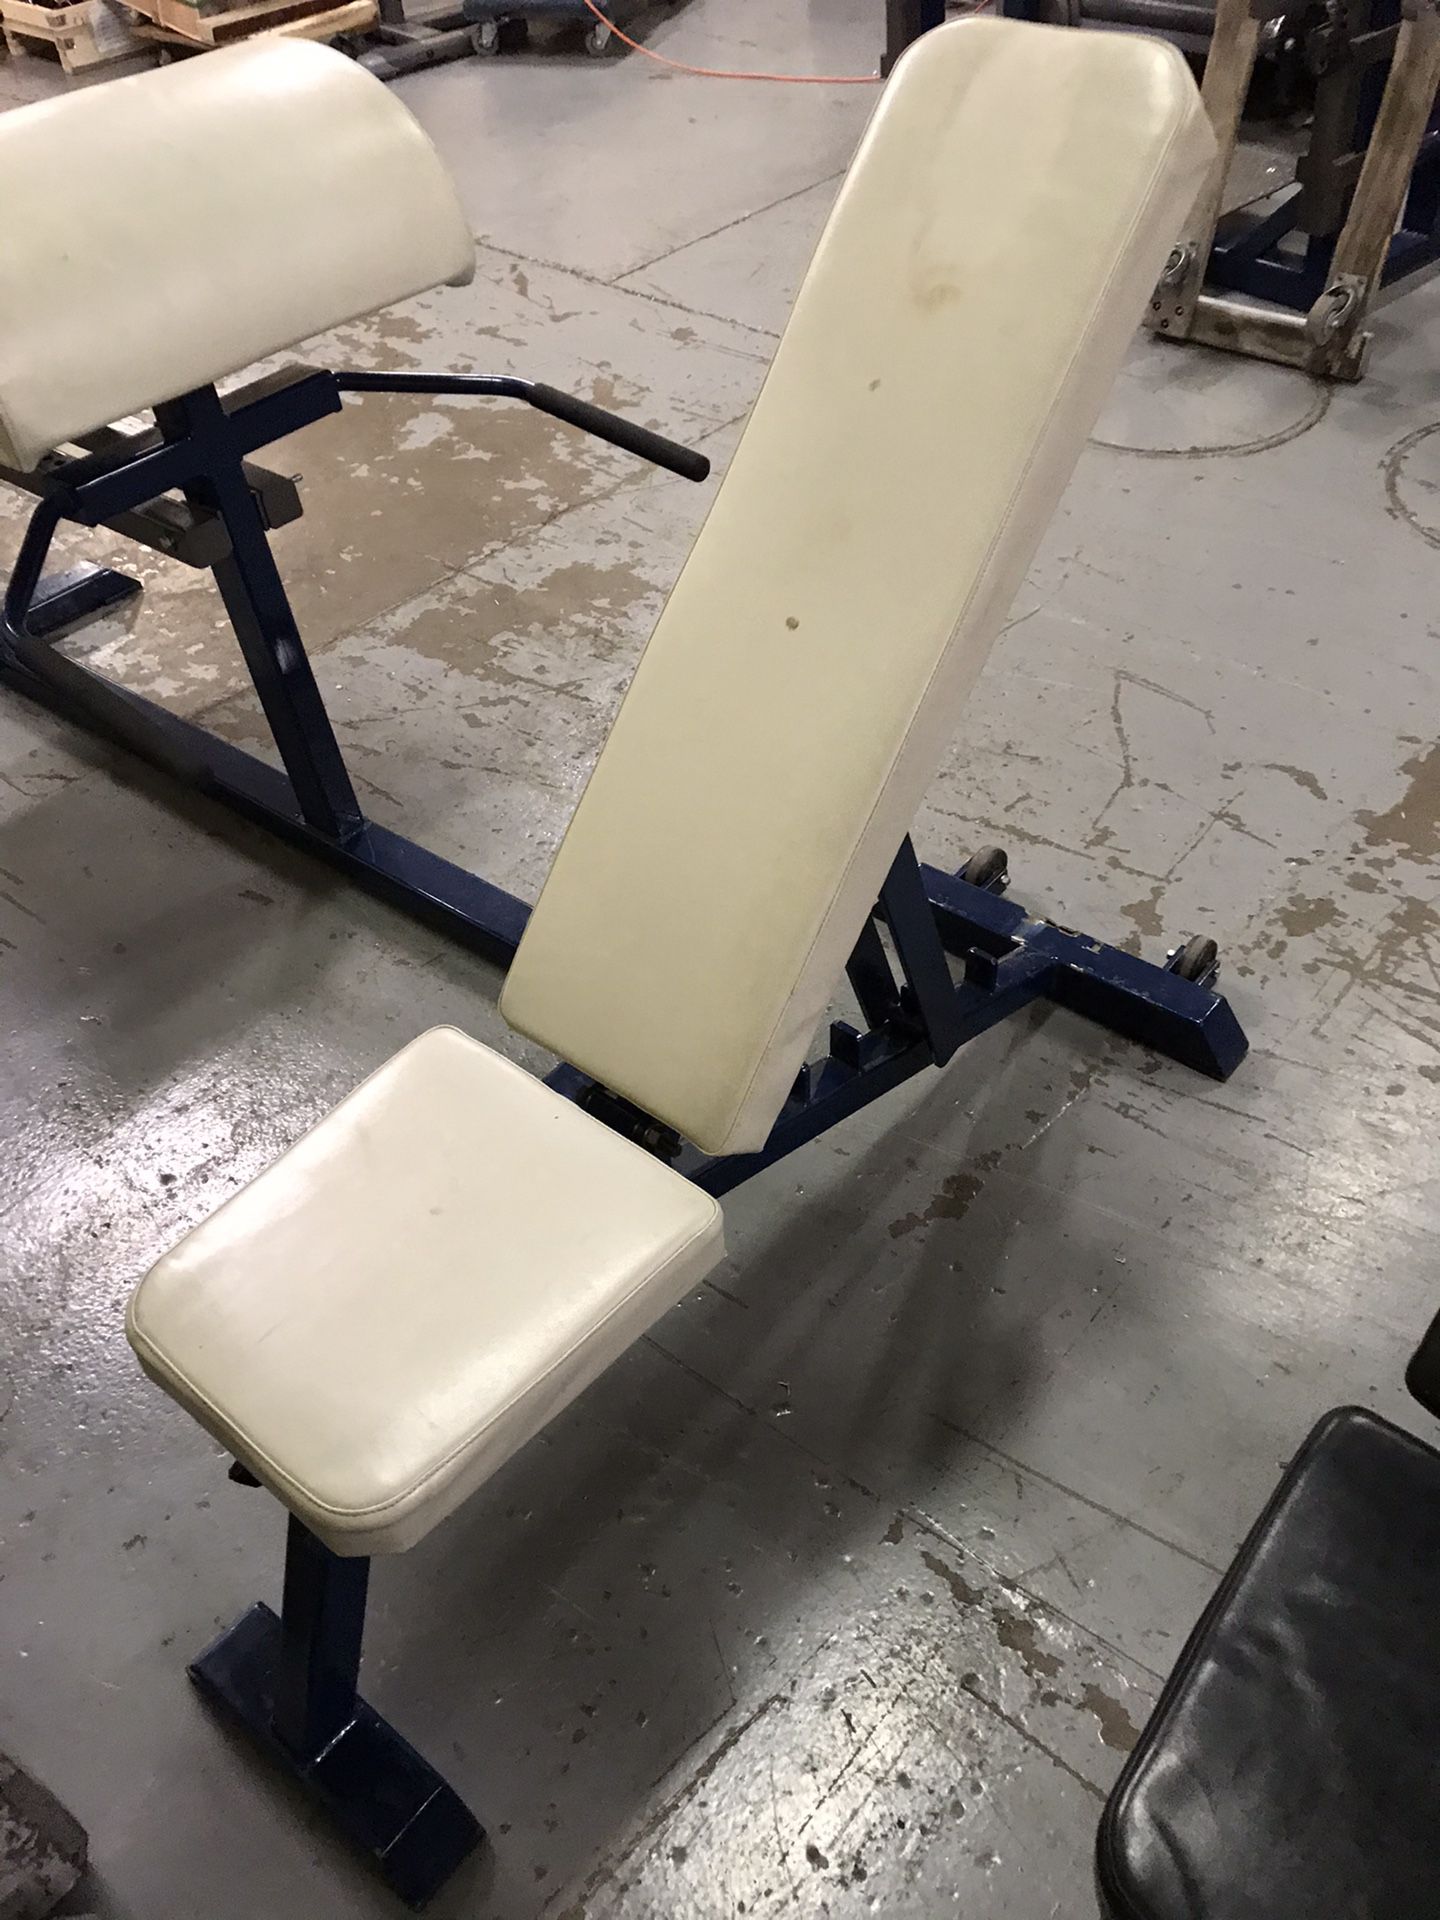 Commercial Adjustable Weight Bench